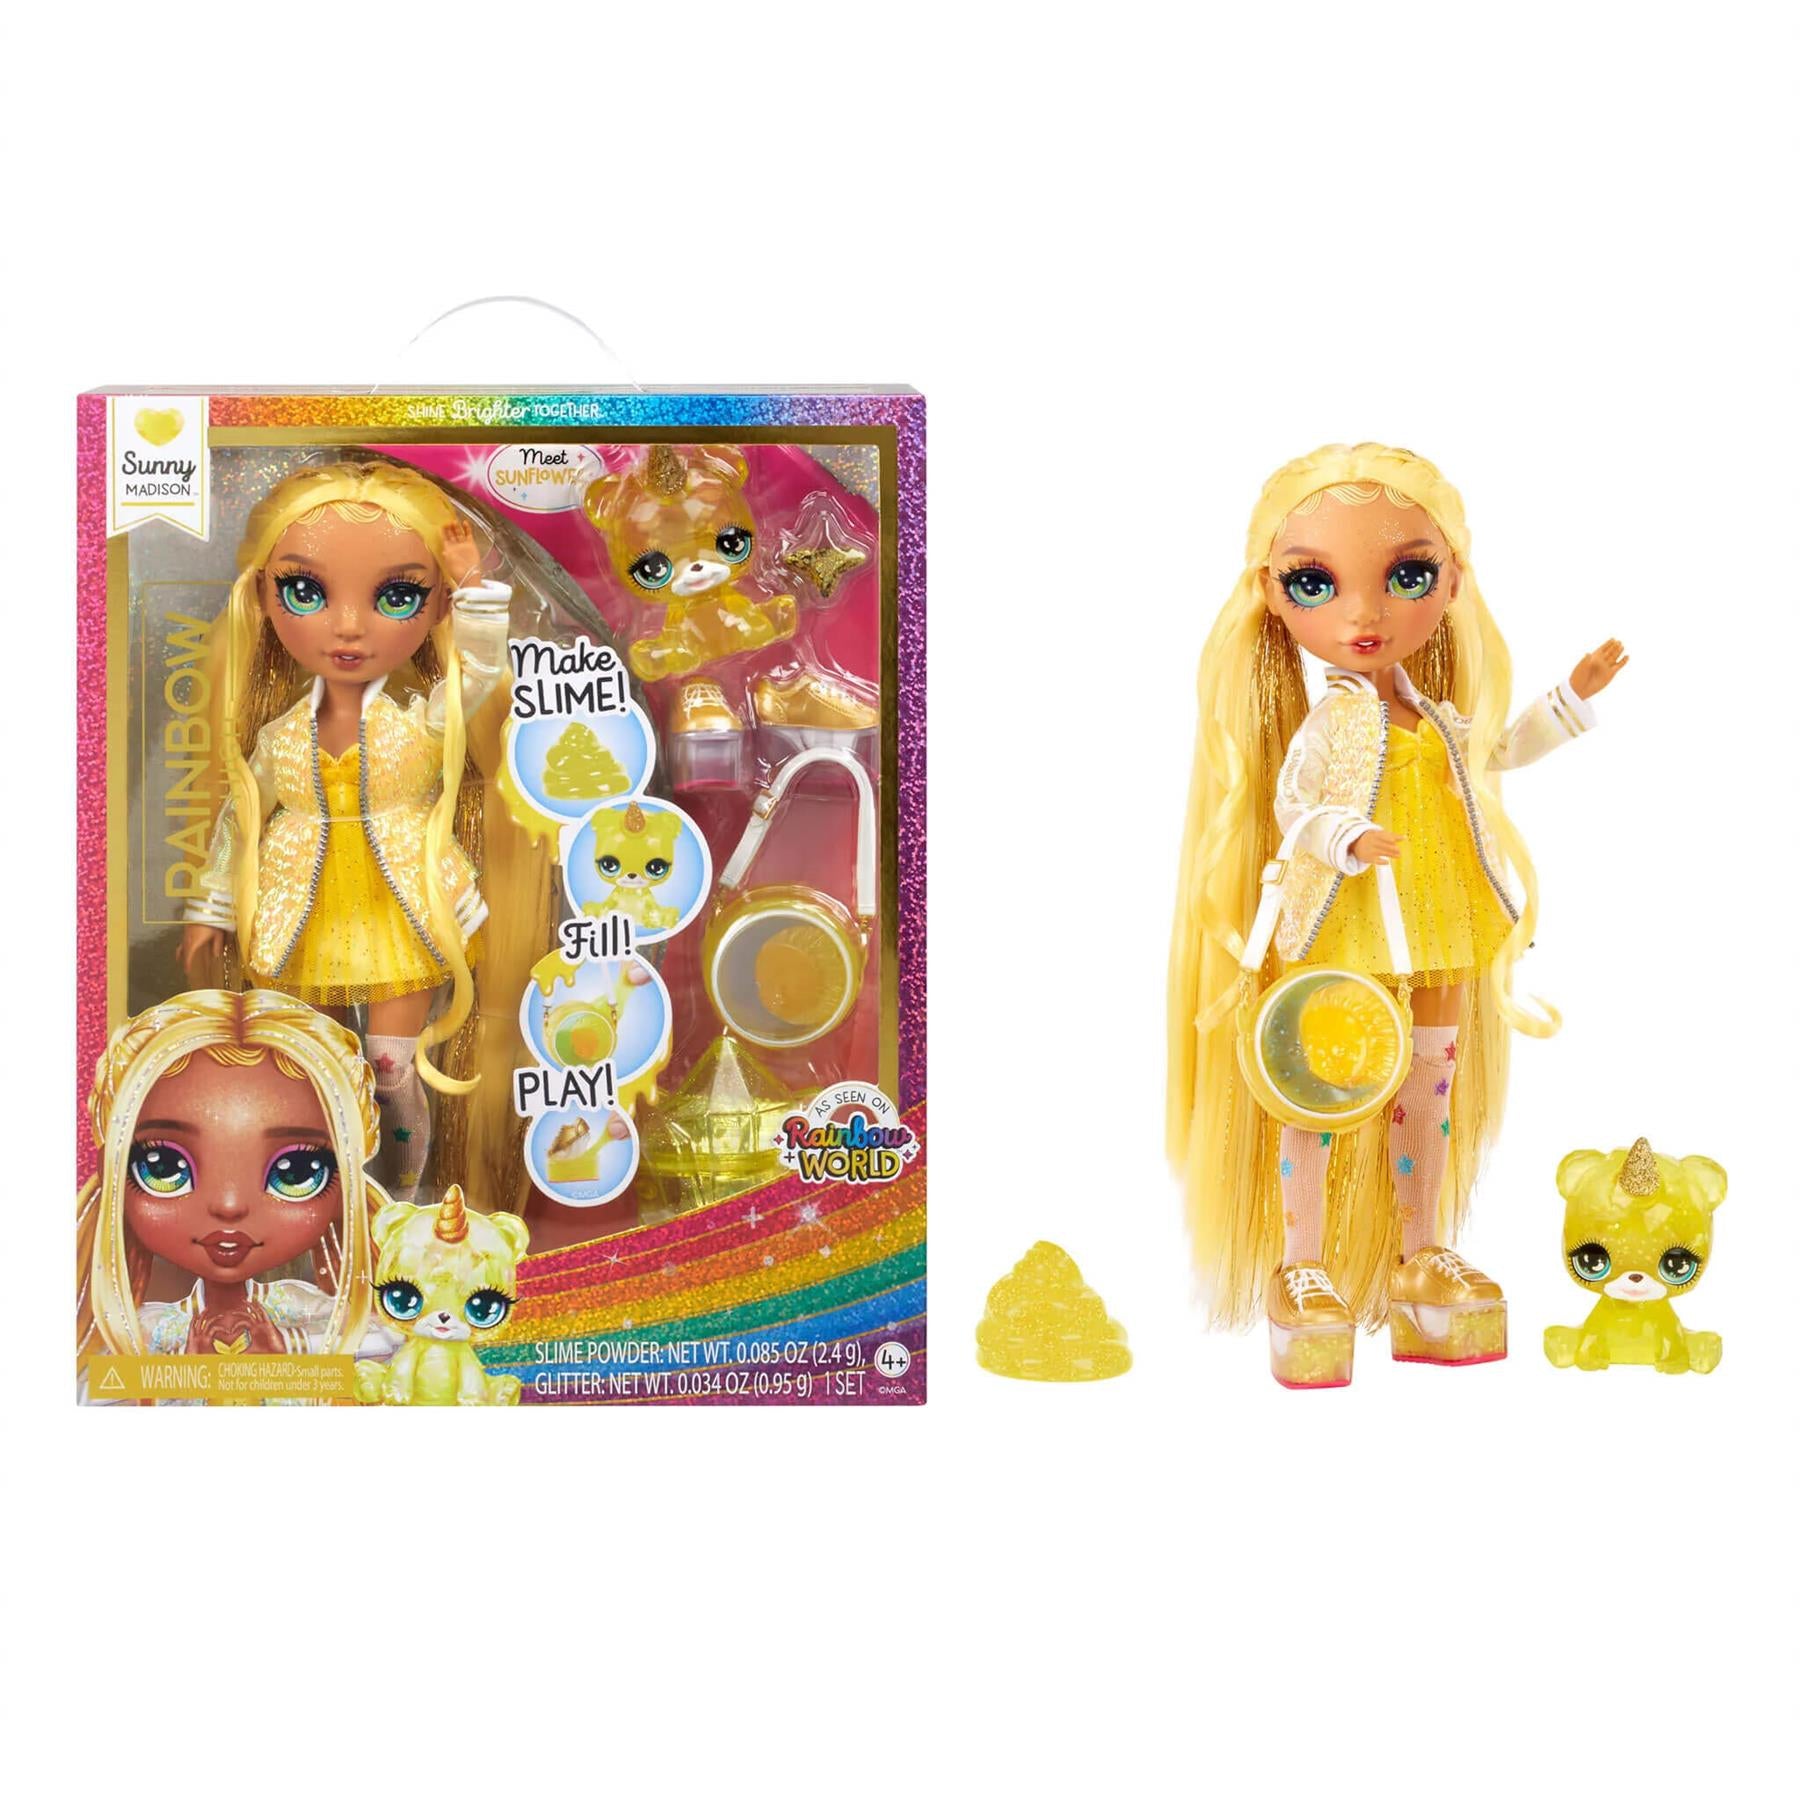 Rainbow High Sunny (Yellow) 11" Doll with Slime Kit & Pet